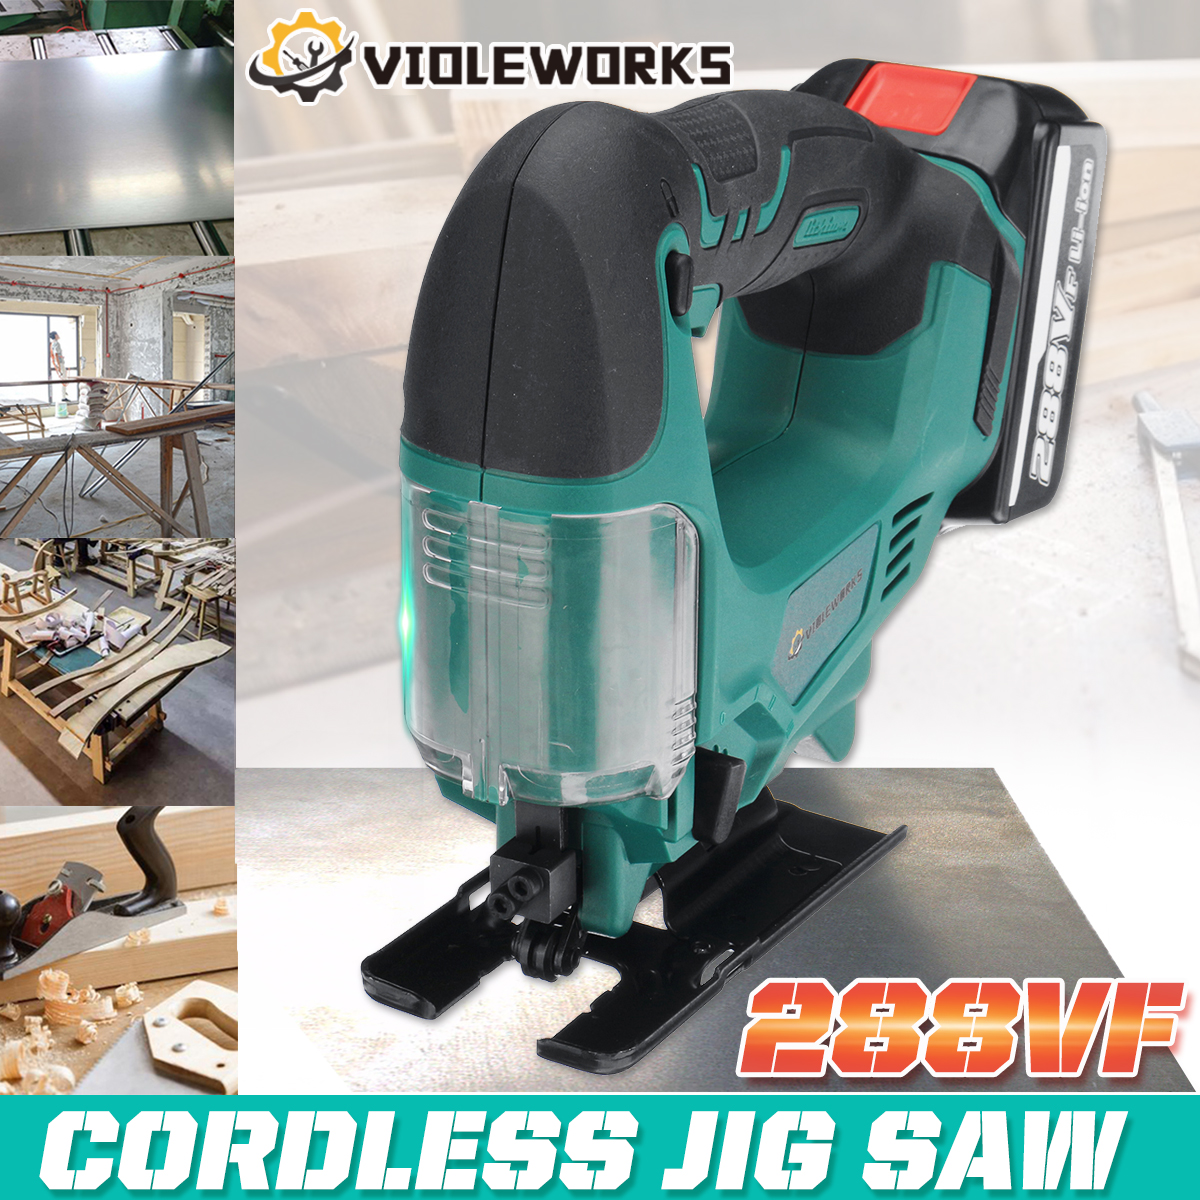 Violeworks-288VF-21V-Cordless-Jigsaw-Rechargeable-Electric-One-Hand-Jig-Saw-W-12pcs-Battery-1841577-2